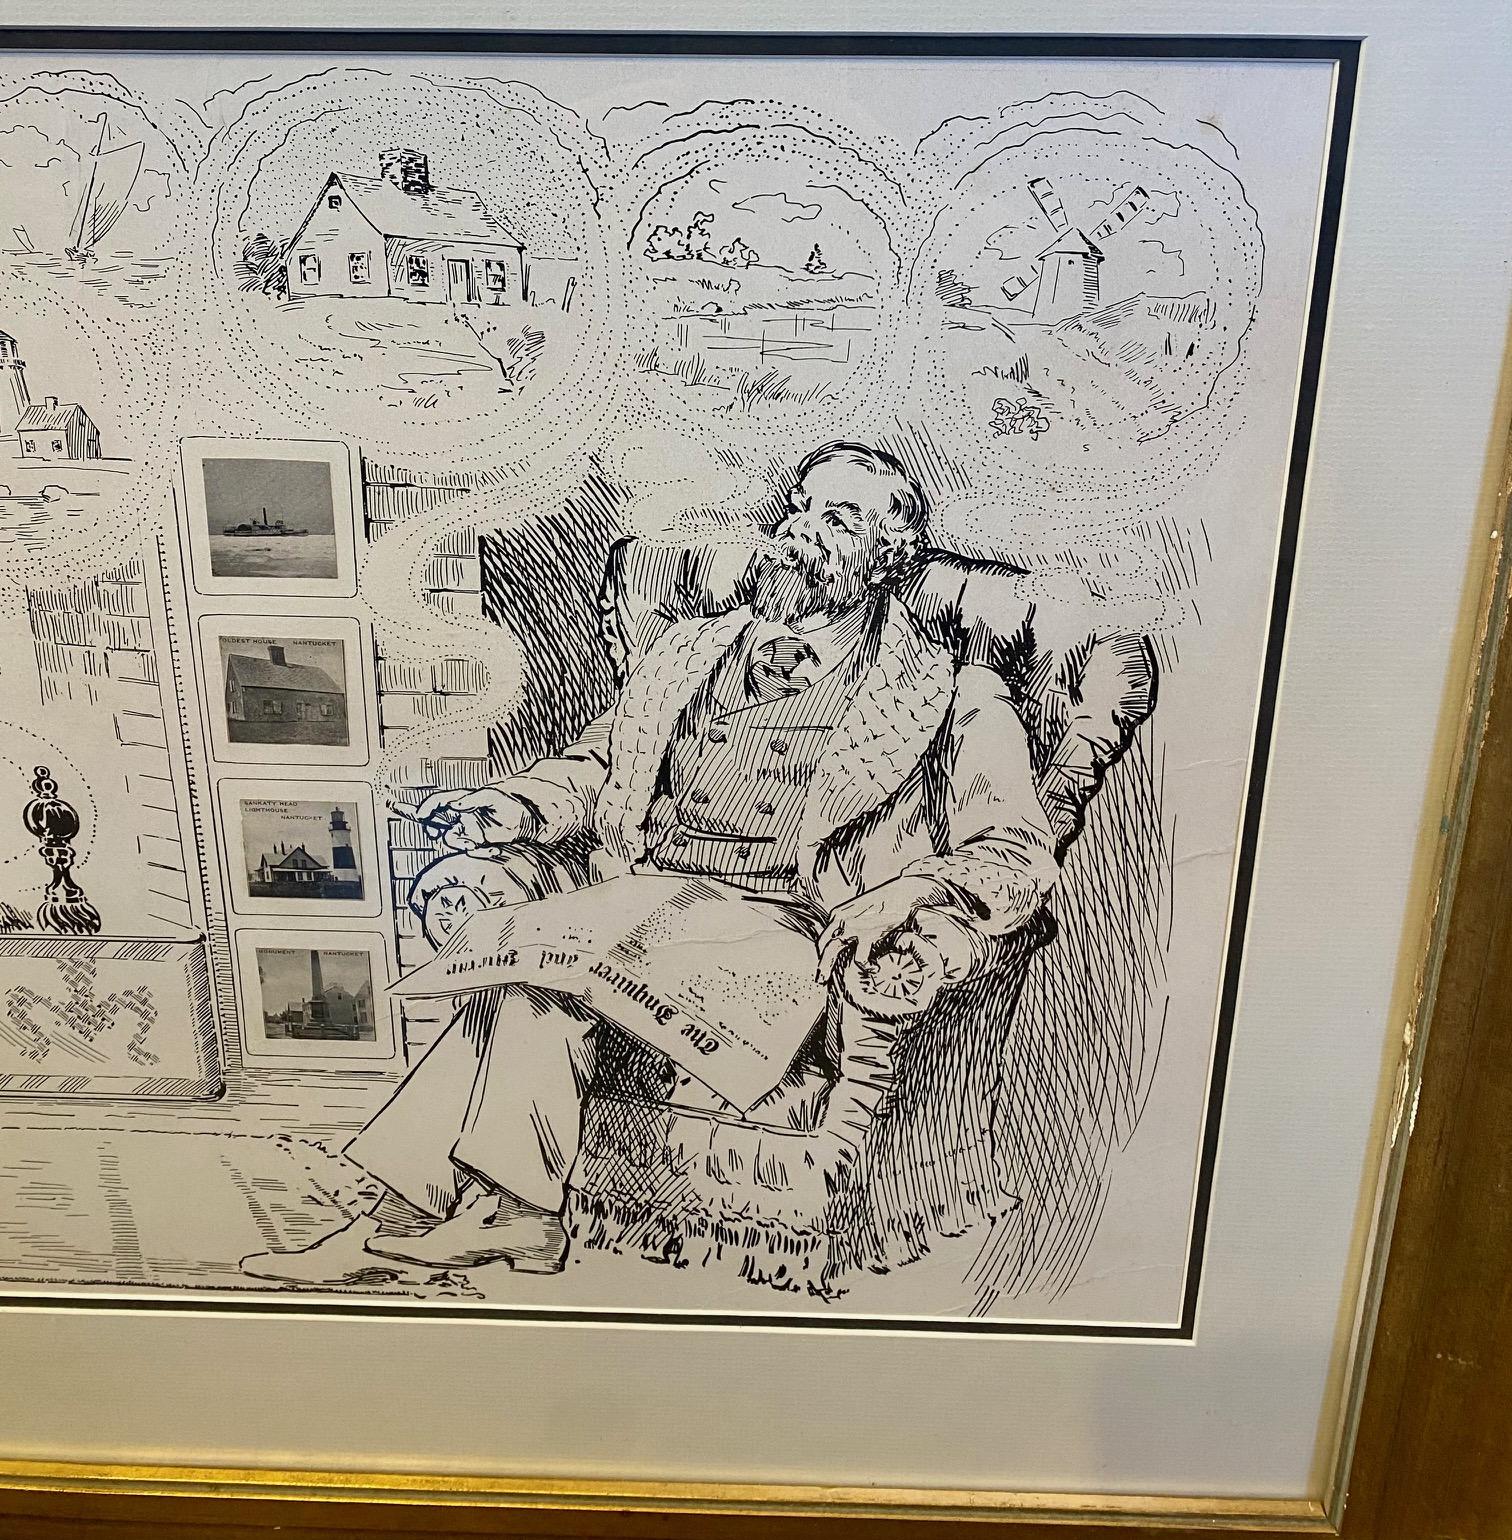 Antique Print of Nantucket Daydreams, by Henry S. Wyer, Nantucket, circa 1900, a period print depicting a gentleman in overstuffed wing chair by the hearth, a copy of Nantucket's 